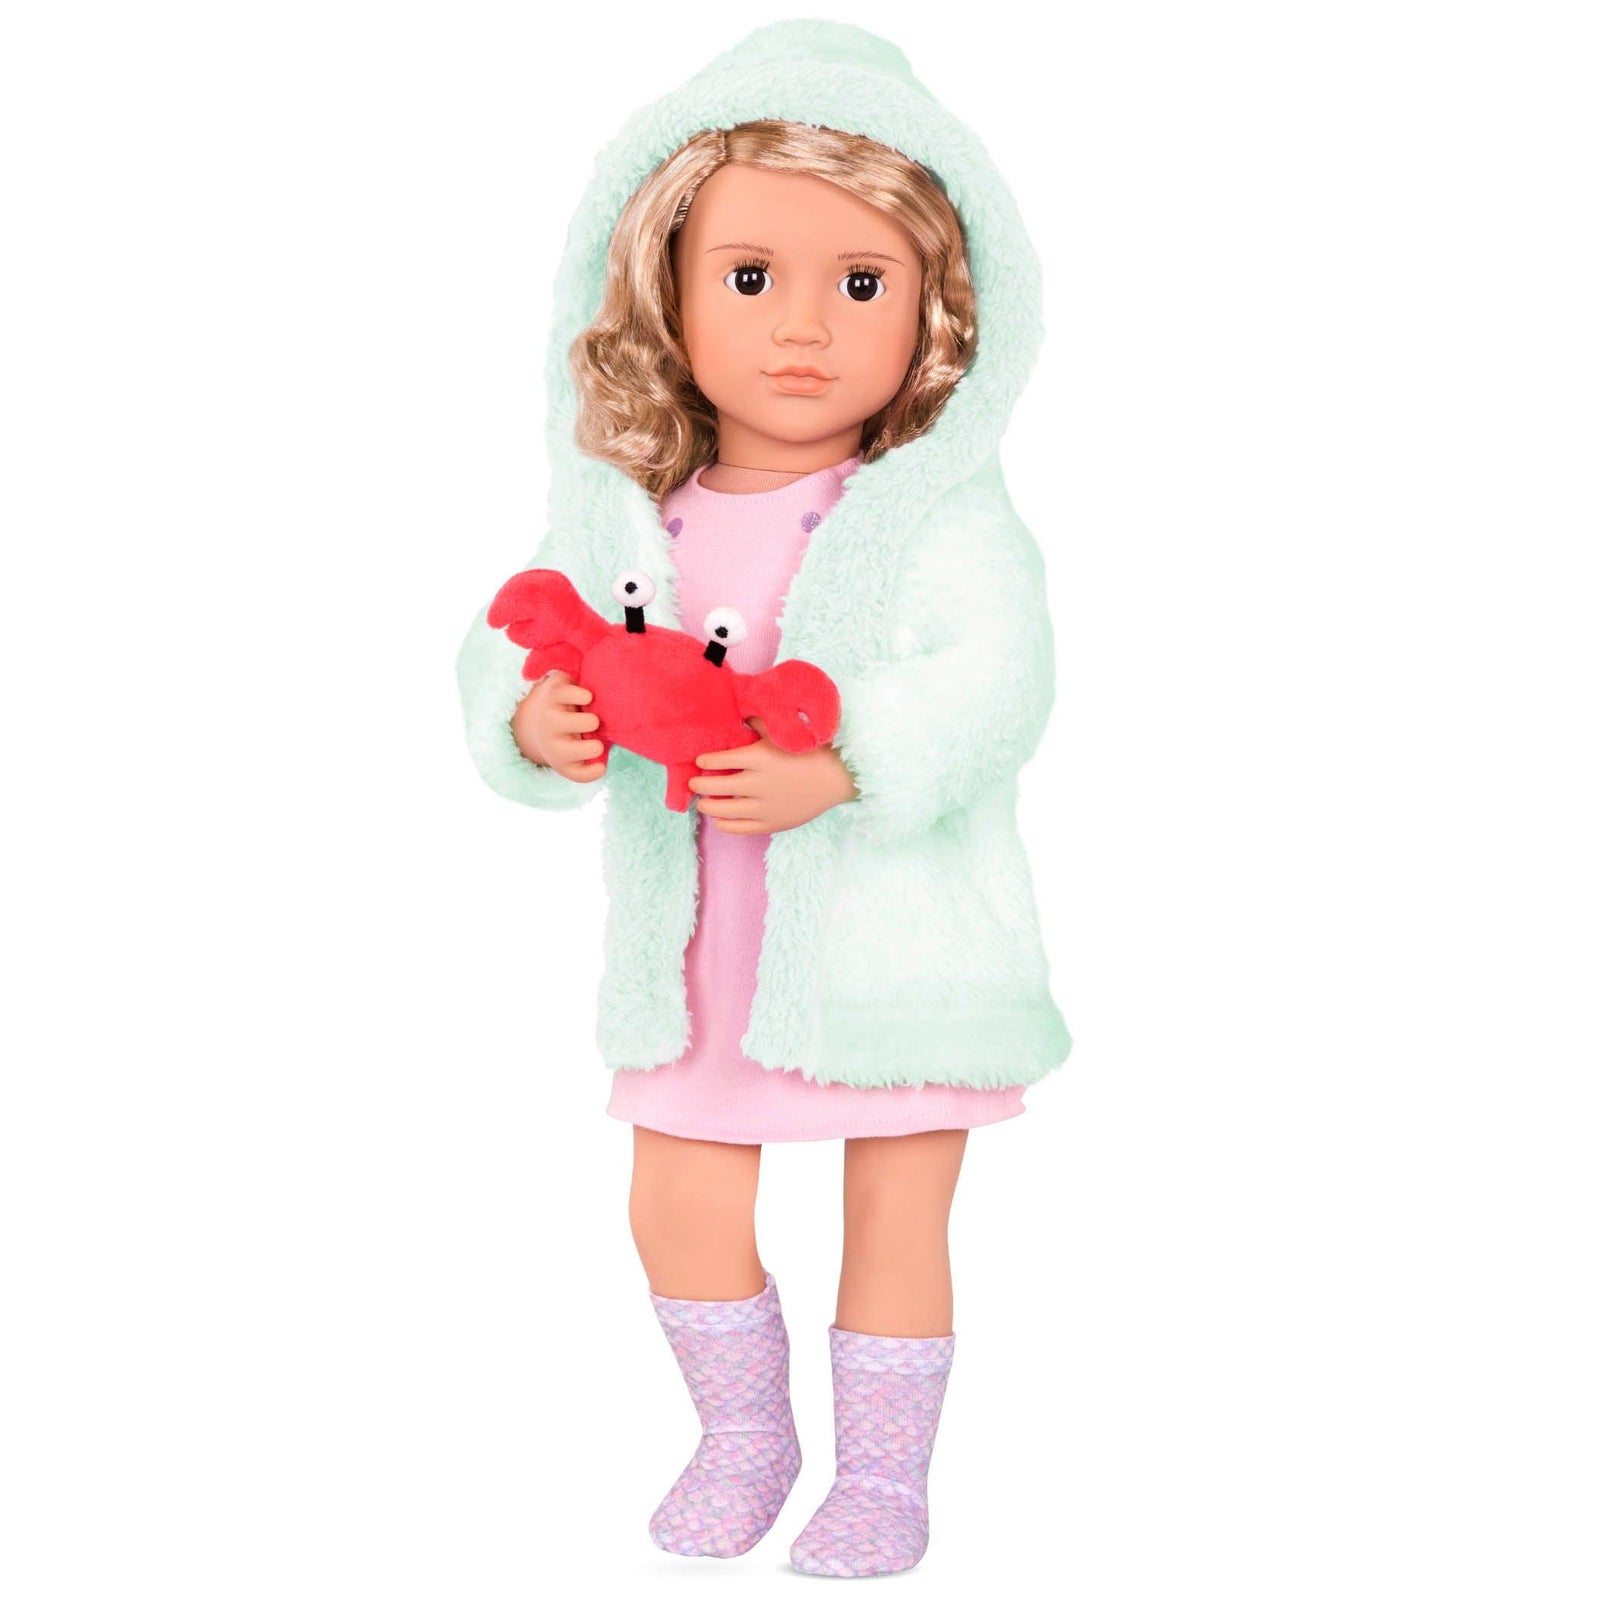 Our Generation: Seaside Dreams robe and pajamas for doll